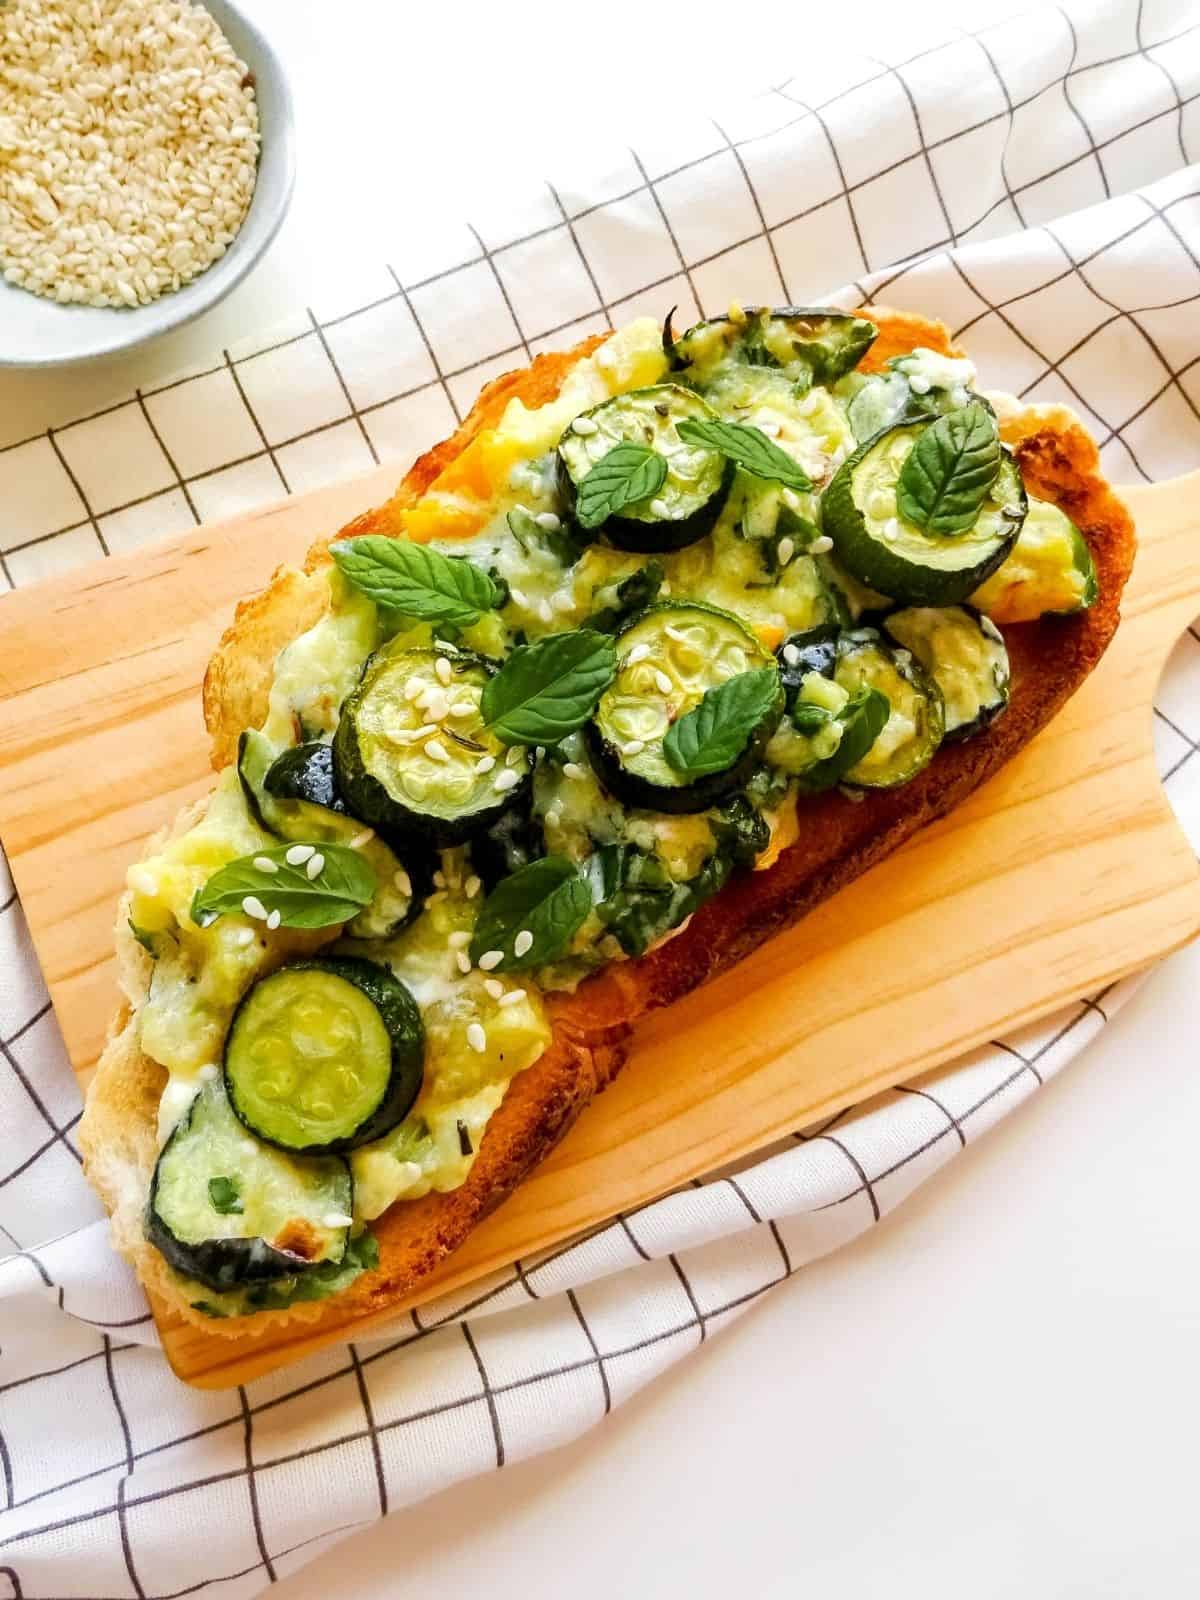 zucchini cheese toast on a wooden board.